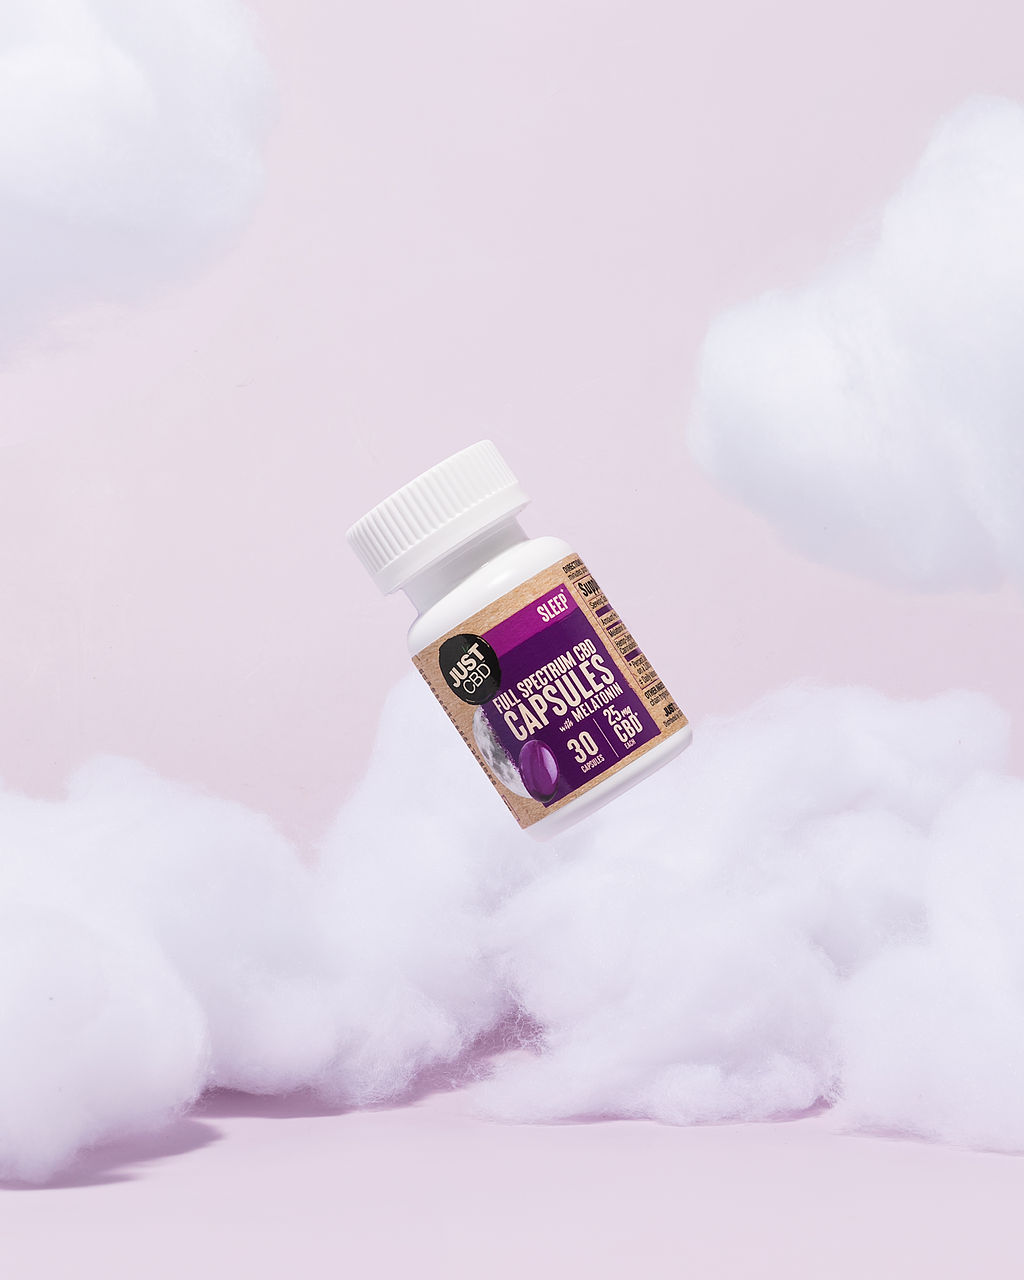 Capsule Chronicles: A Personal Journey with Just CBD’s CBD Capsules!